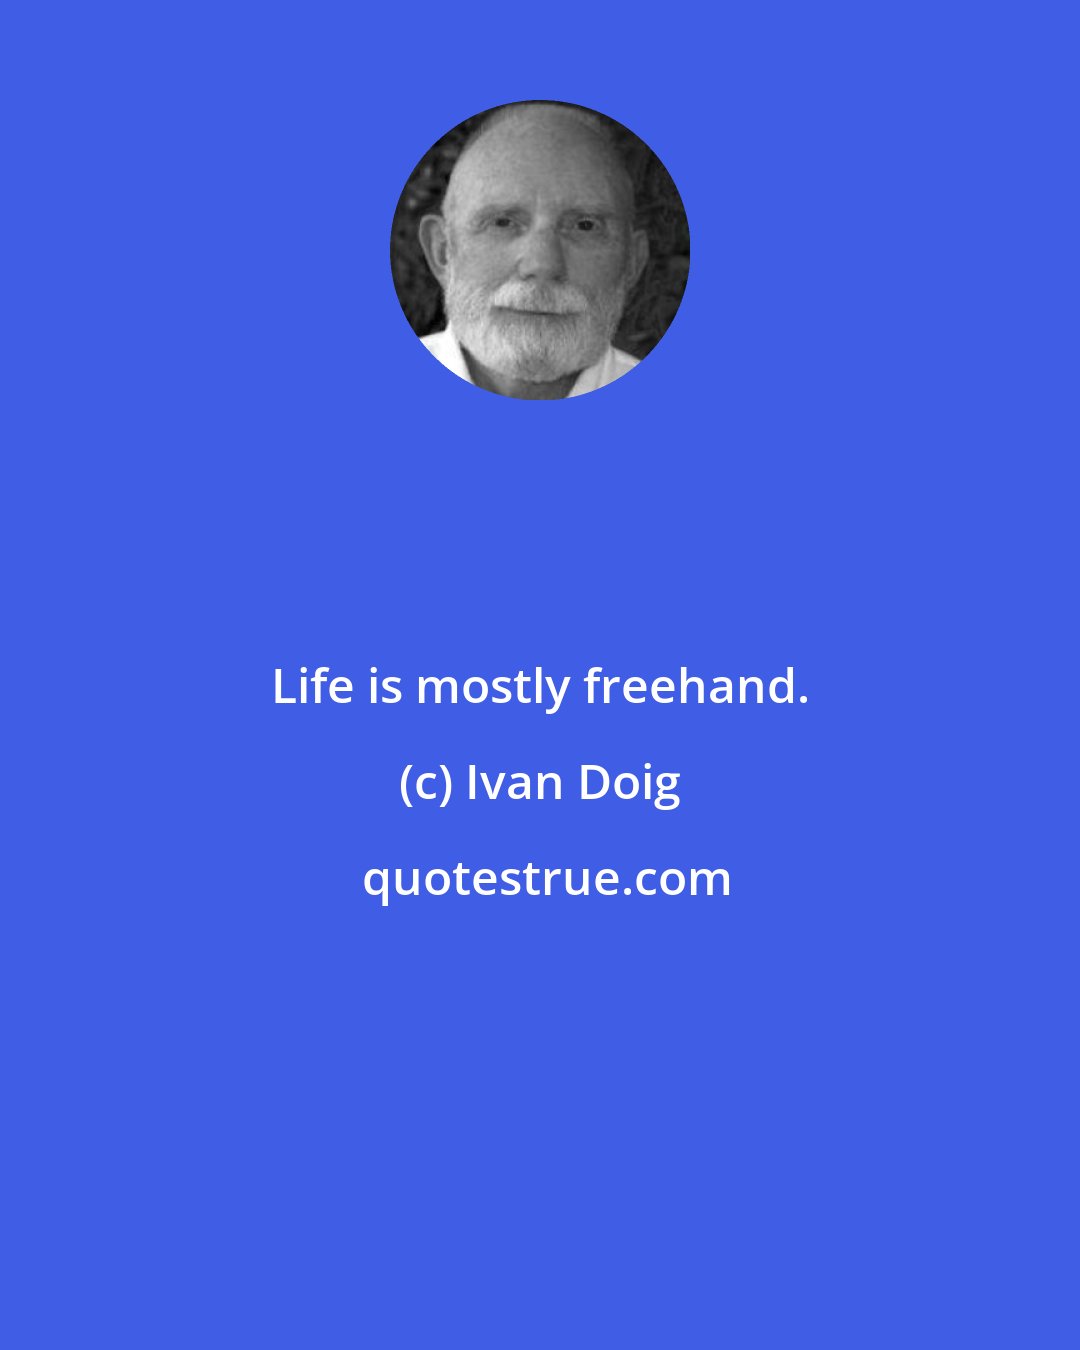 Ivan Doig: Life is mostly freehand.